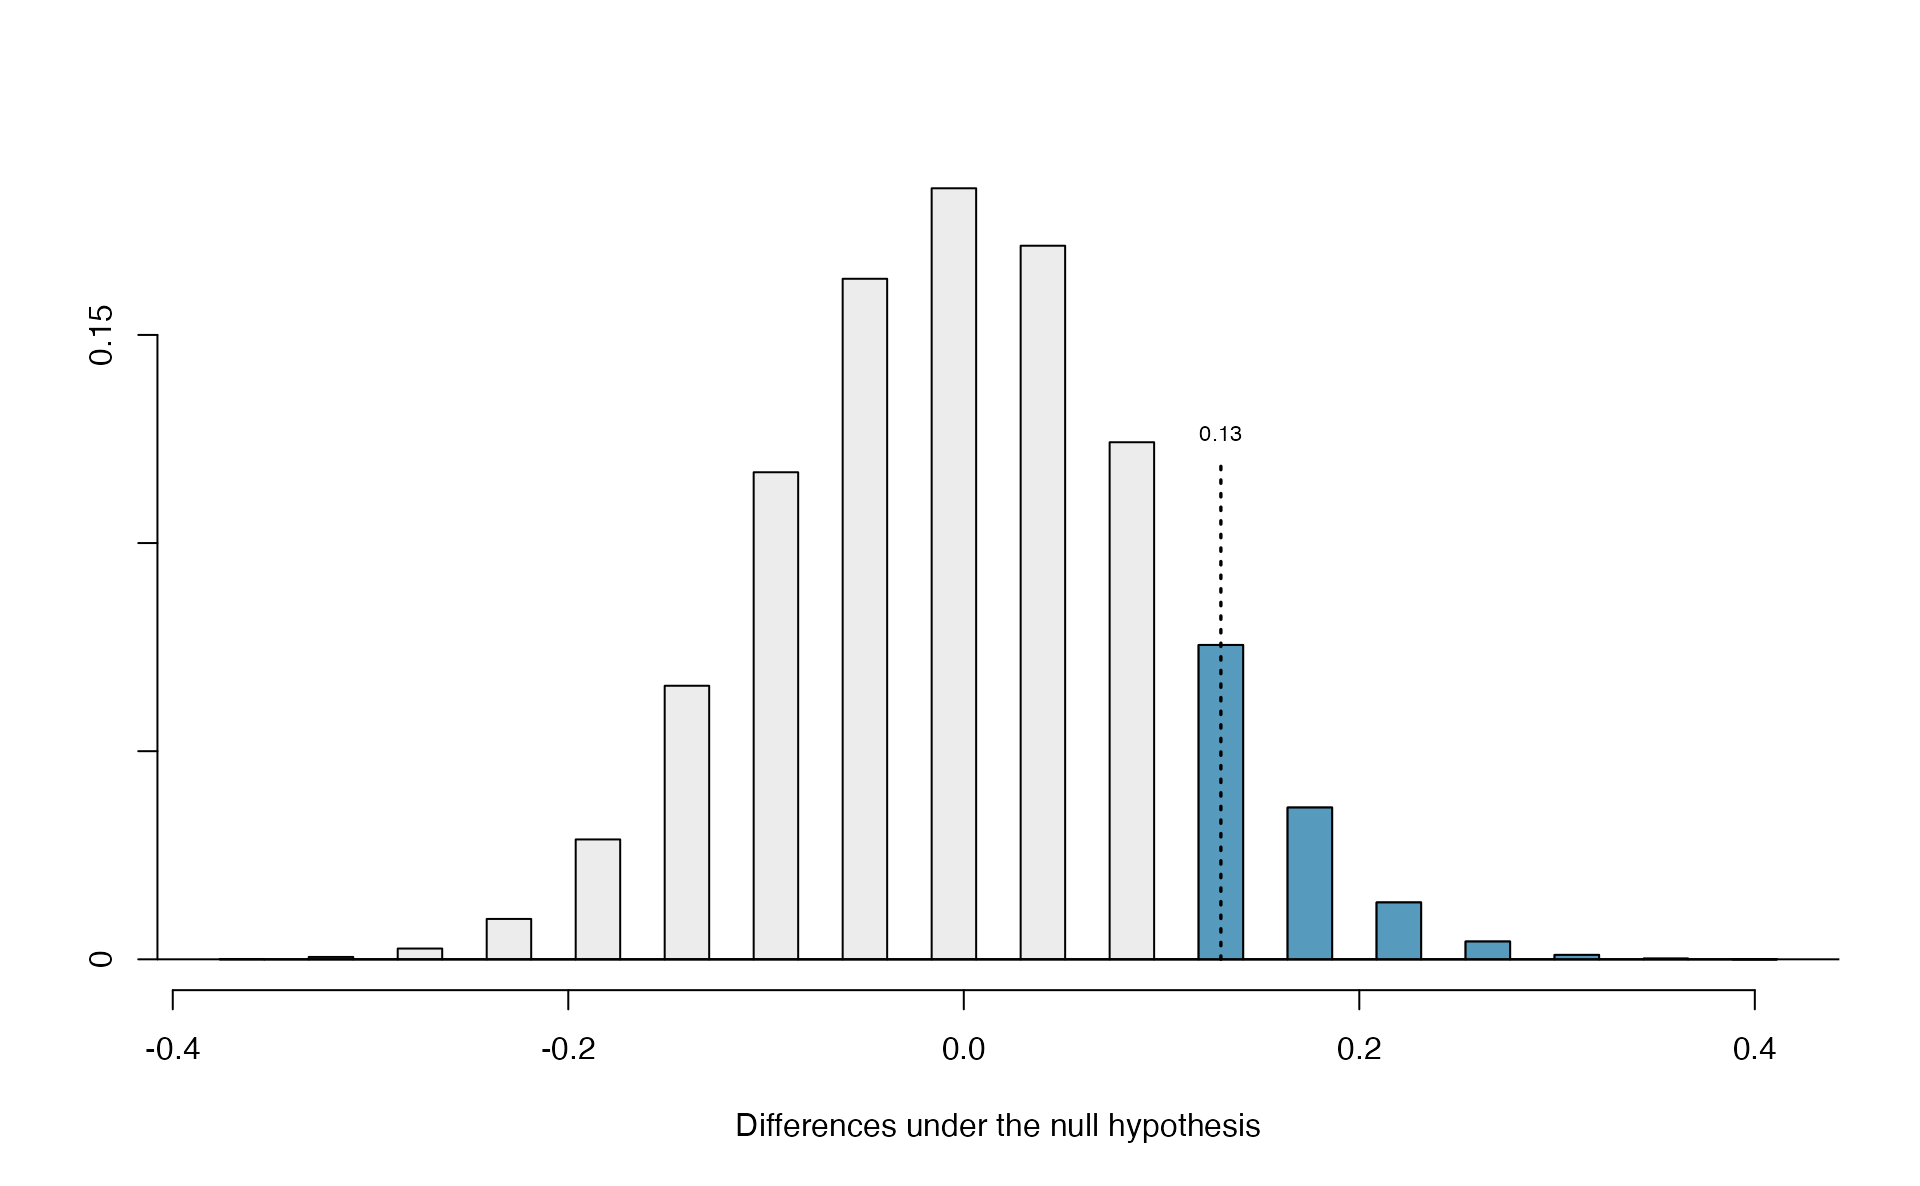 Null distribution of the point estimate for the difference in proportions, $\hat{p}_t - \hat{p}_c$. The shaded right tail shows observations that are at least as large as the observed difference, 0.13.